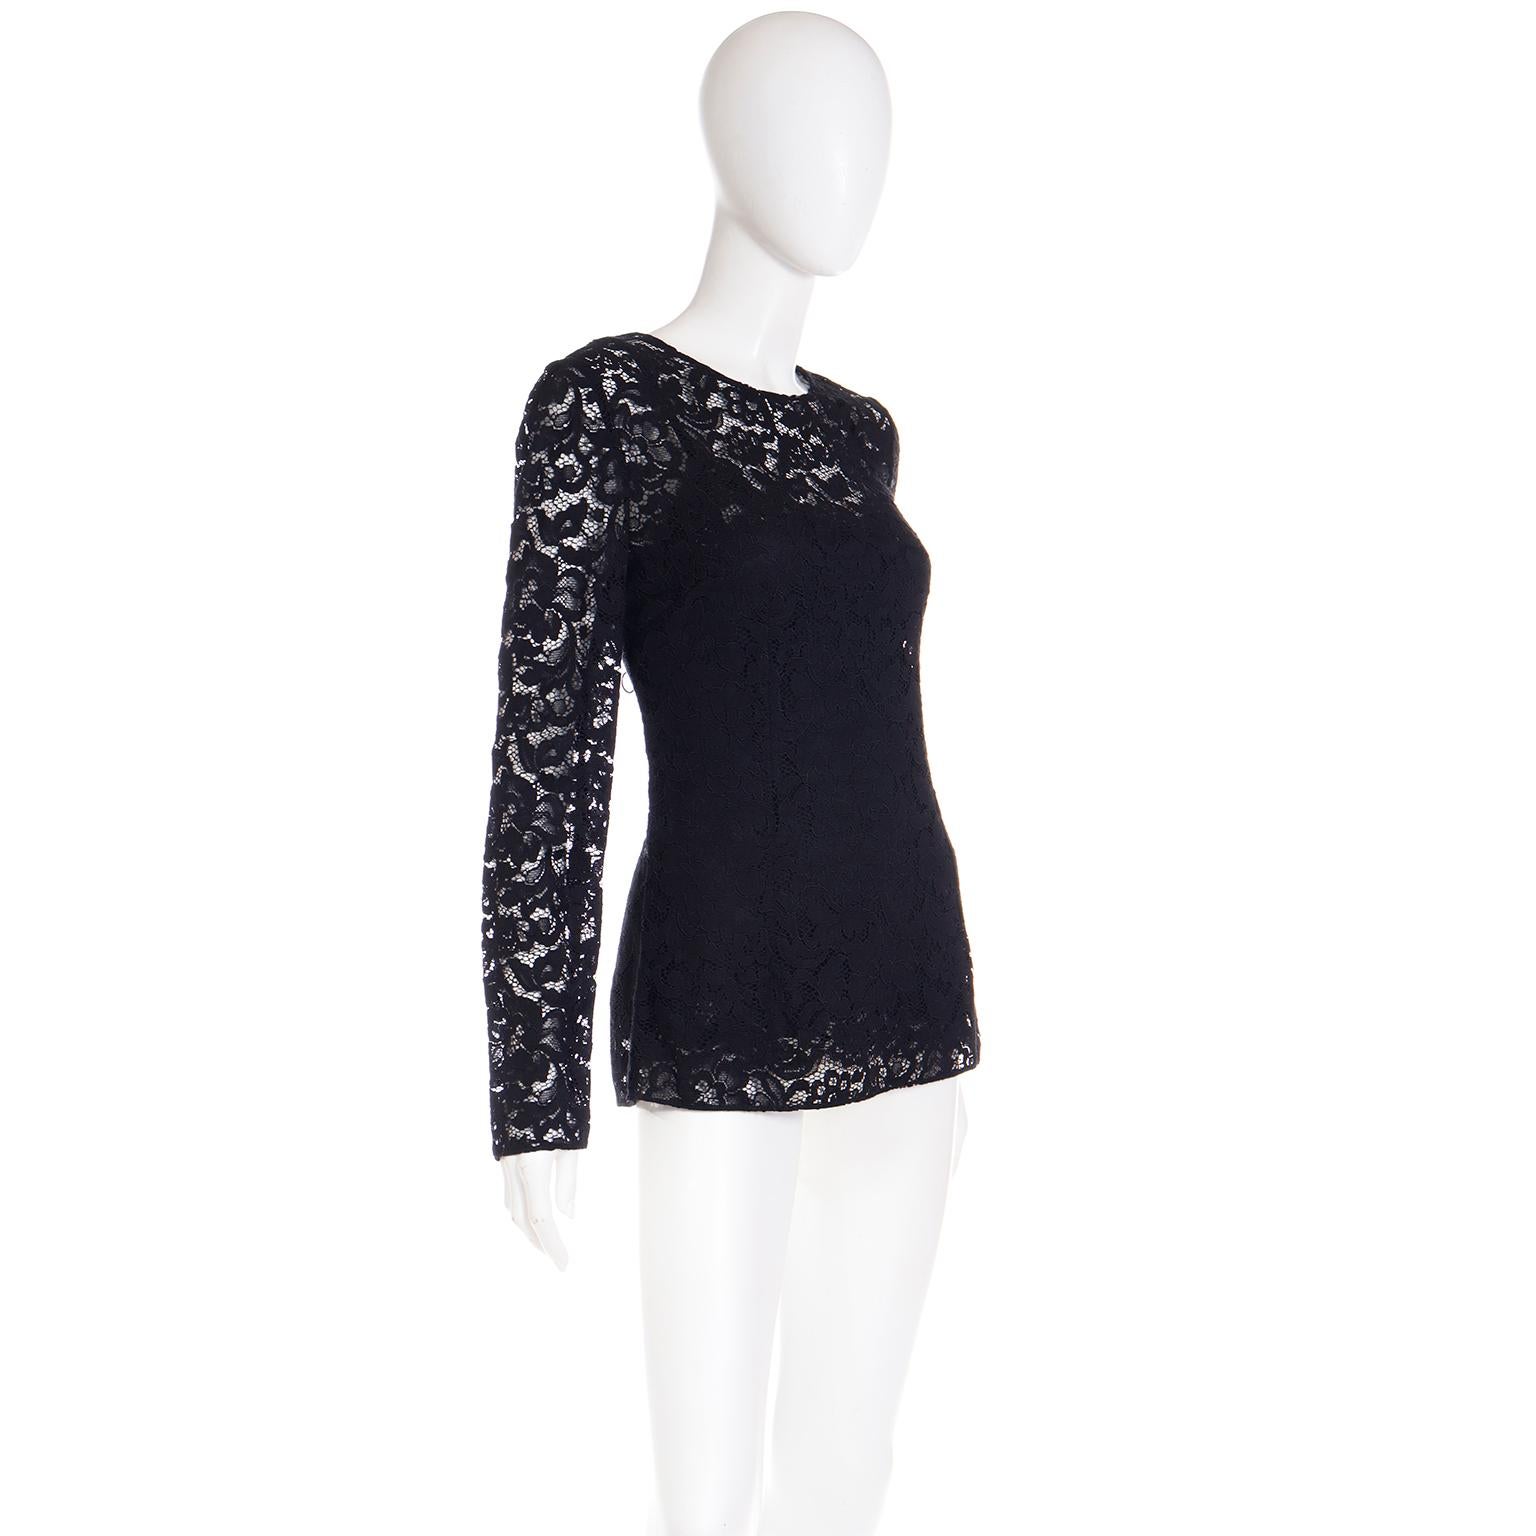 Women's Dolce & Gabbana Black Lace Blouse Top With Long Sleeves & Built in Camisole For Sale